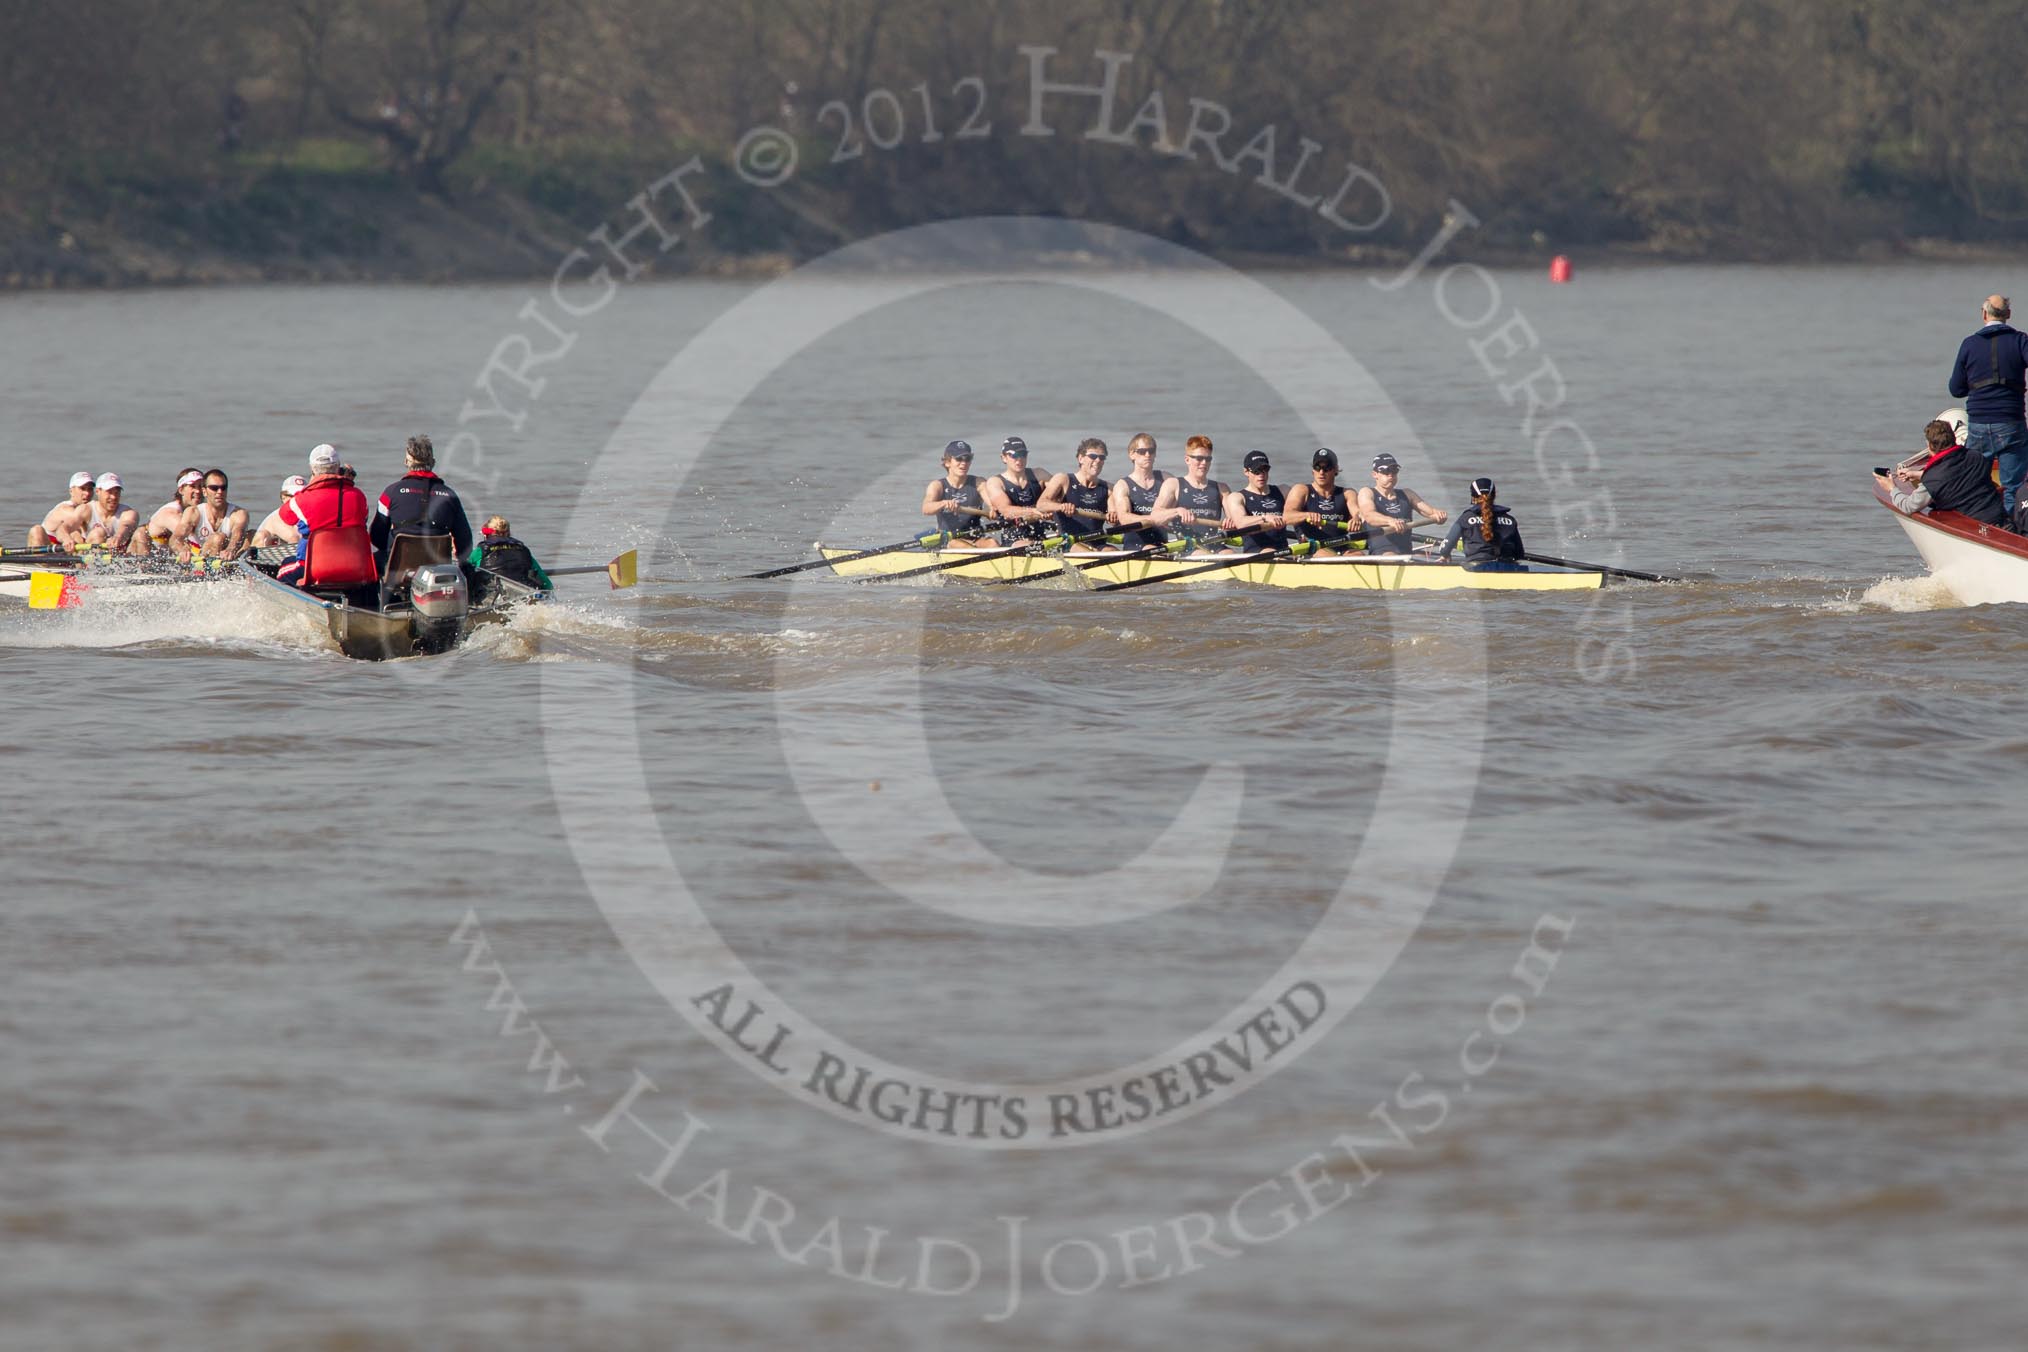 The Boat Race season 2012 - fixture OUBC vs Leander: The all-to-be-named Tideway Scullers squad against OUBC's Isis, hbow Tom Hilton, Chris Fairweather, Julian Bubb-Humfryes, Ben Snodin, Joe Dawson, Geordie Macleod, Justin Webb, stroke Tom Watson, and cox Katherine Apfelbaum..




on 24 March 2012 at 14:01, image #82